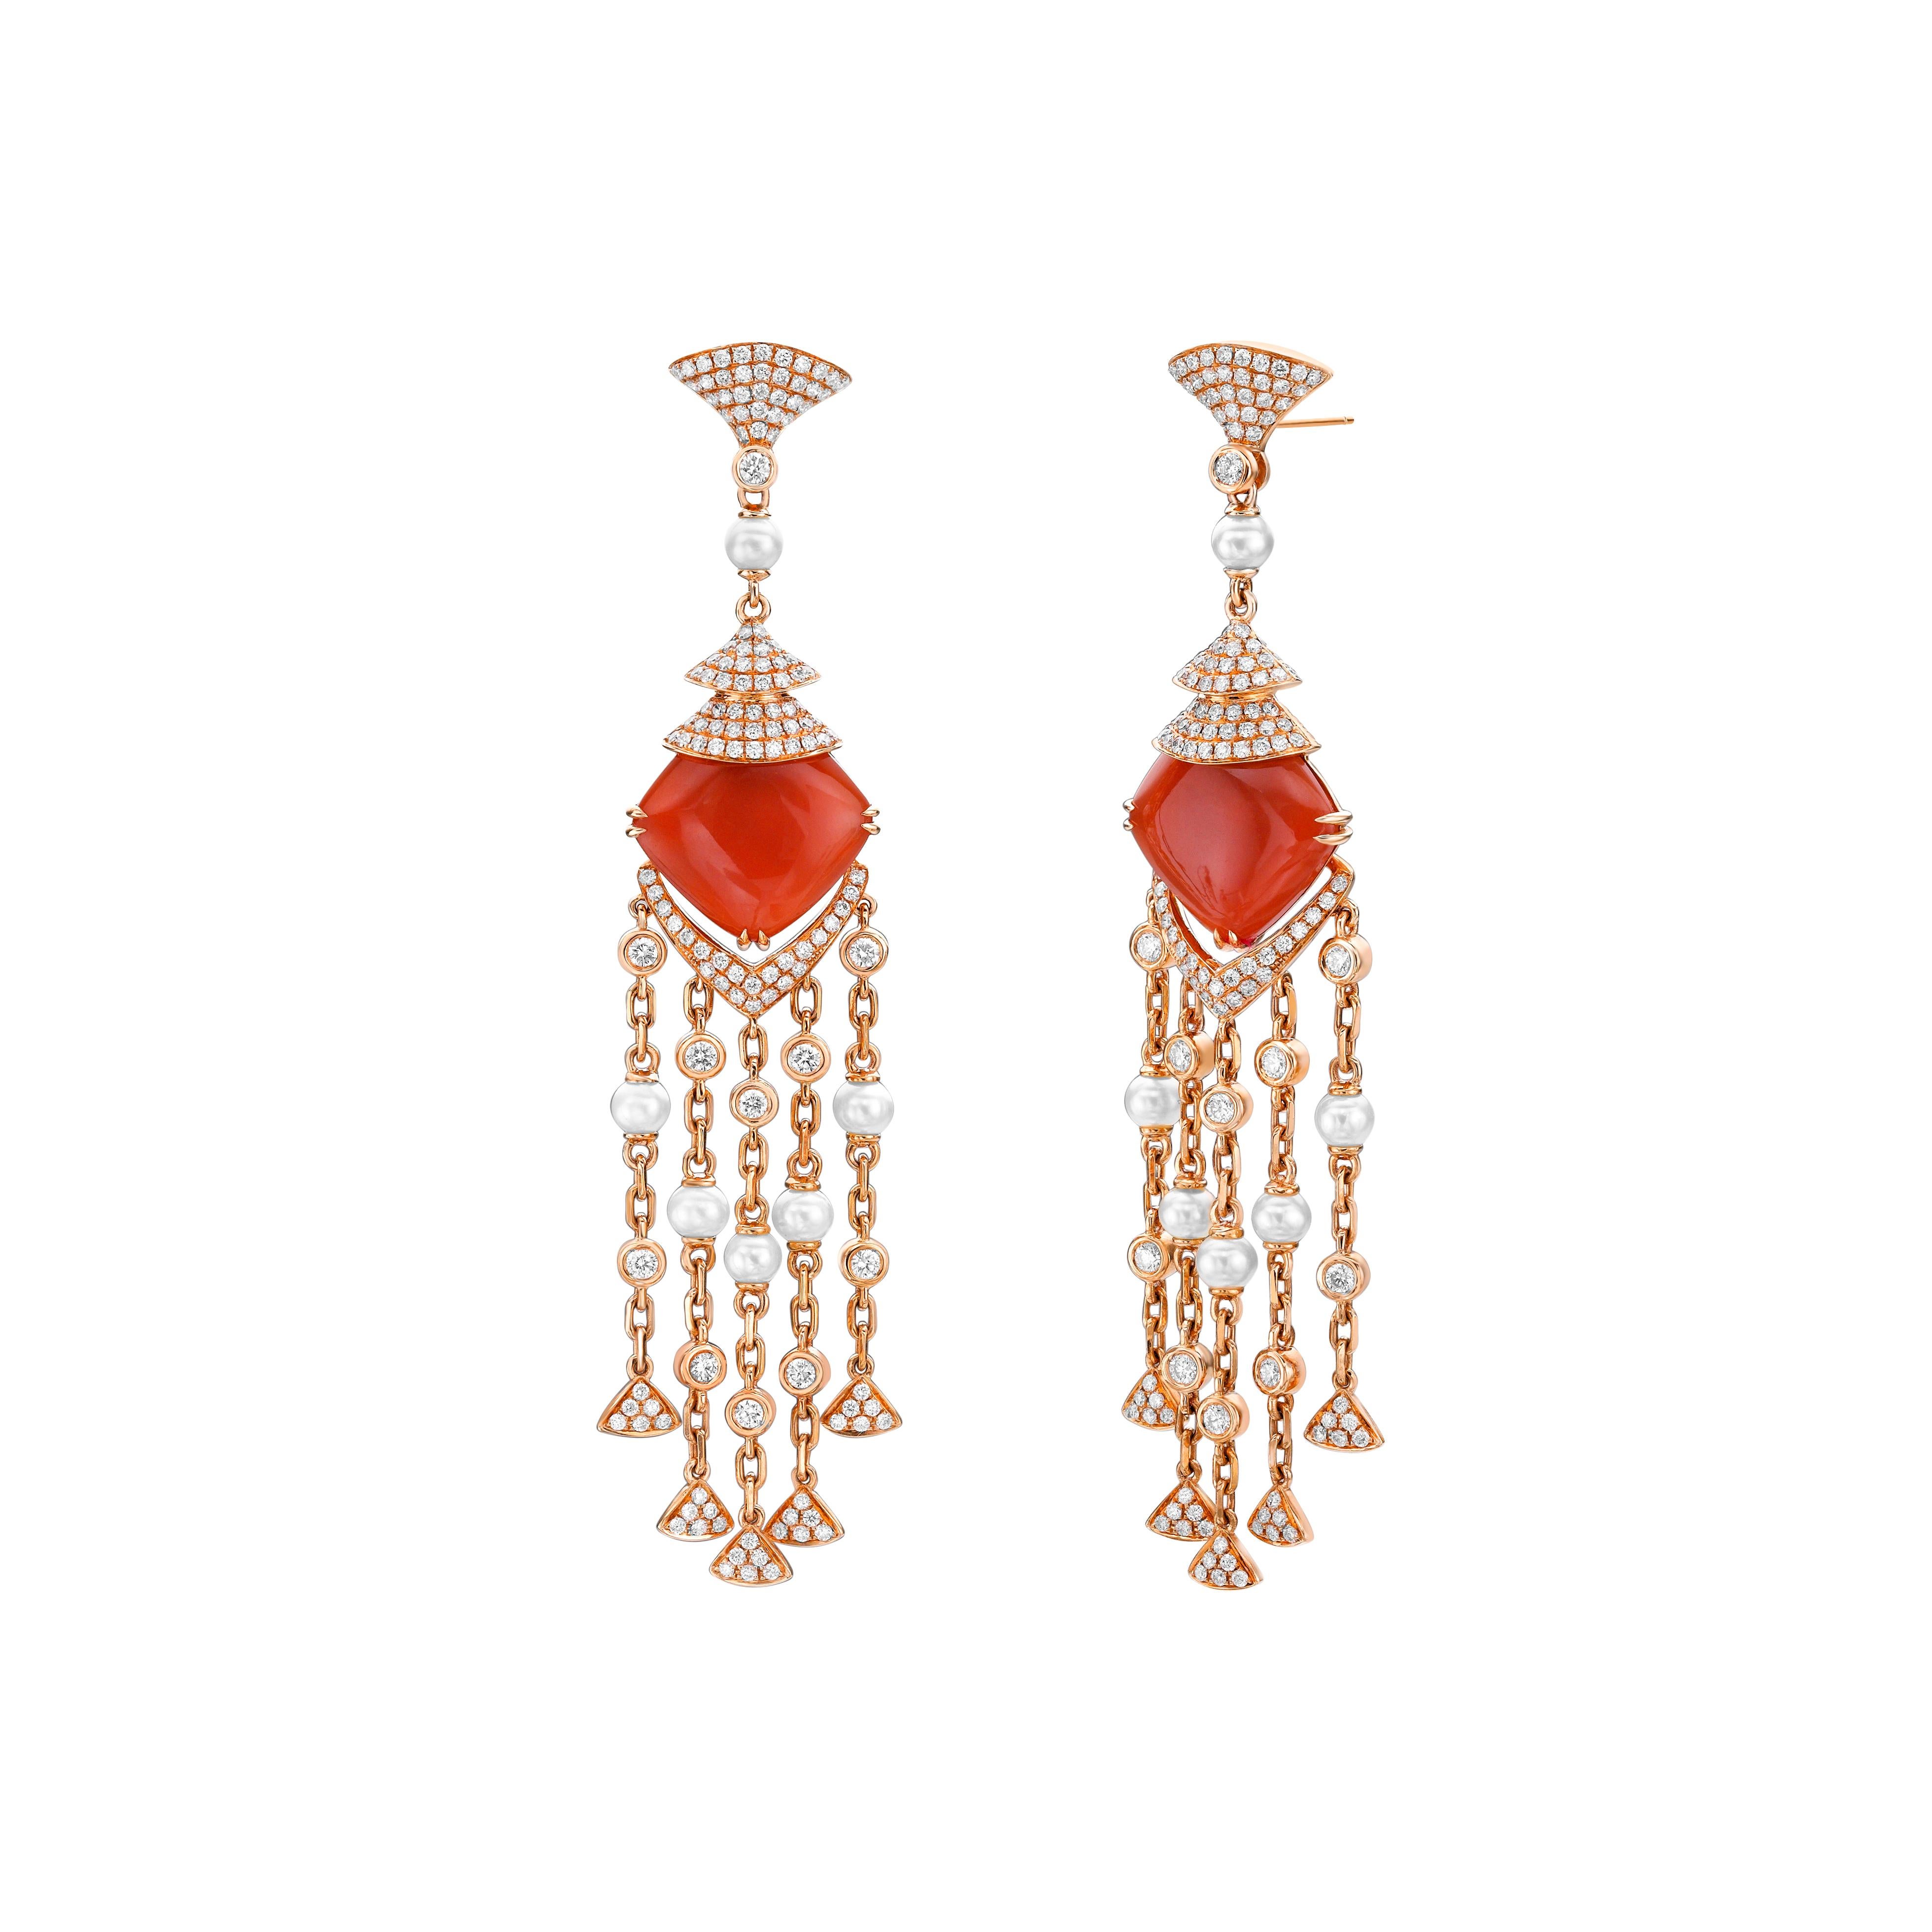 Contemporary 17.6 Carat Moonstone Earrings in 18 Karat Gold with Diamond & Pearls For Sale